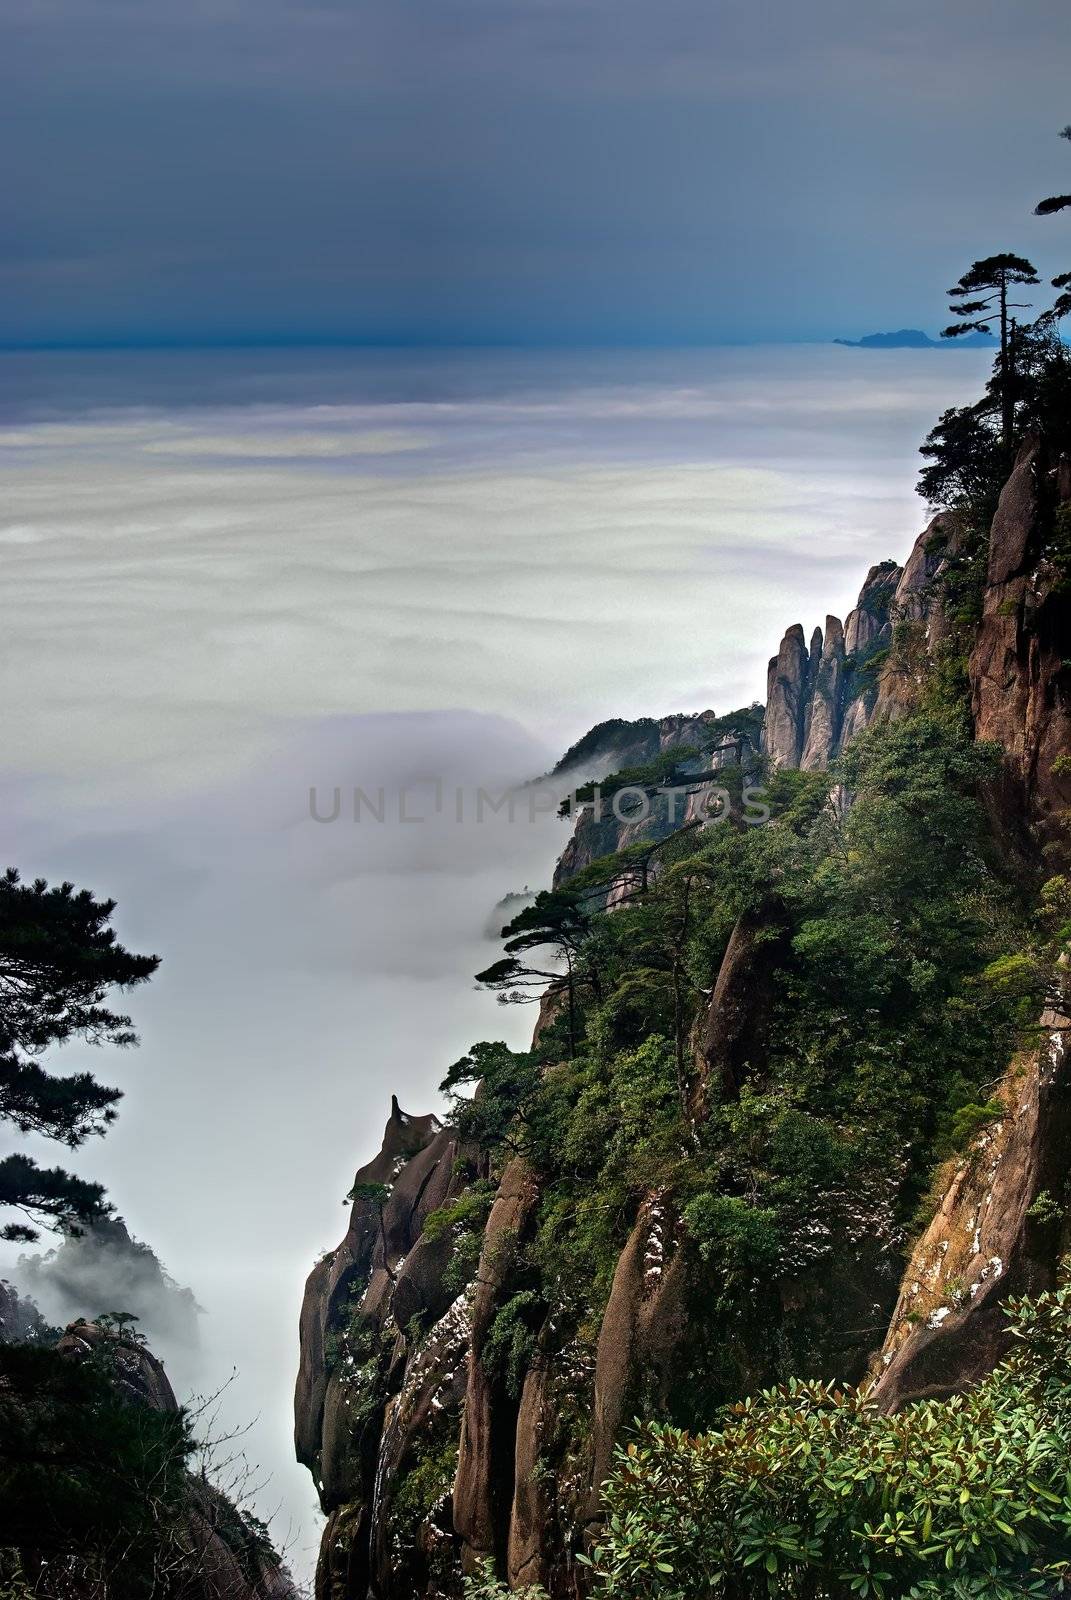 The Sanqingshan has been listed as World Natural Heritage